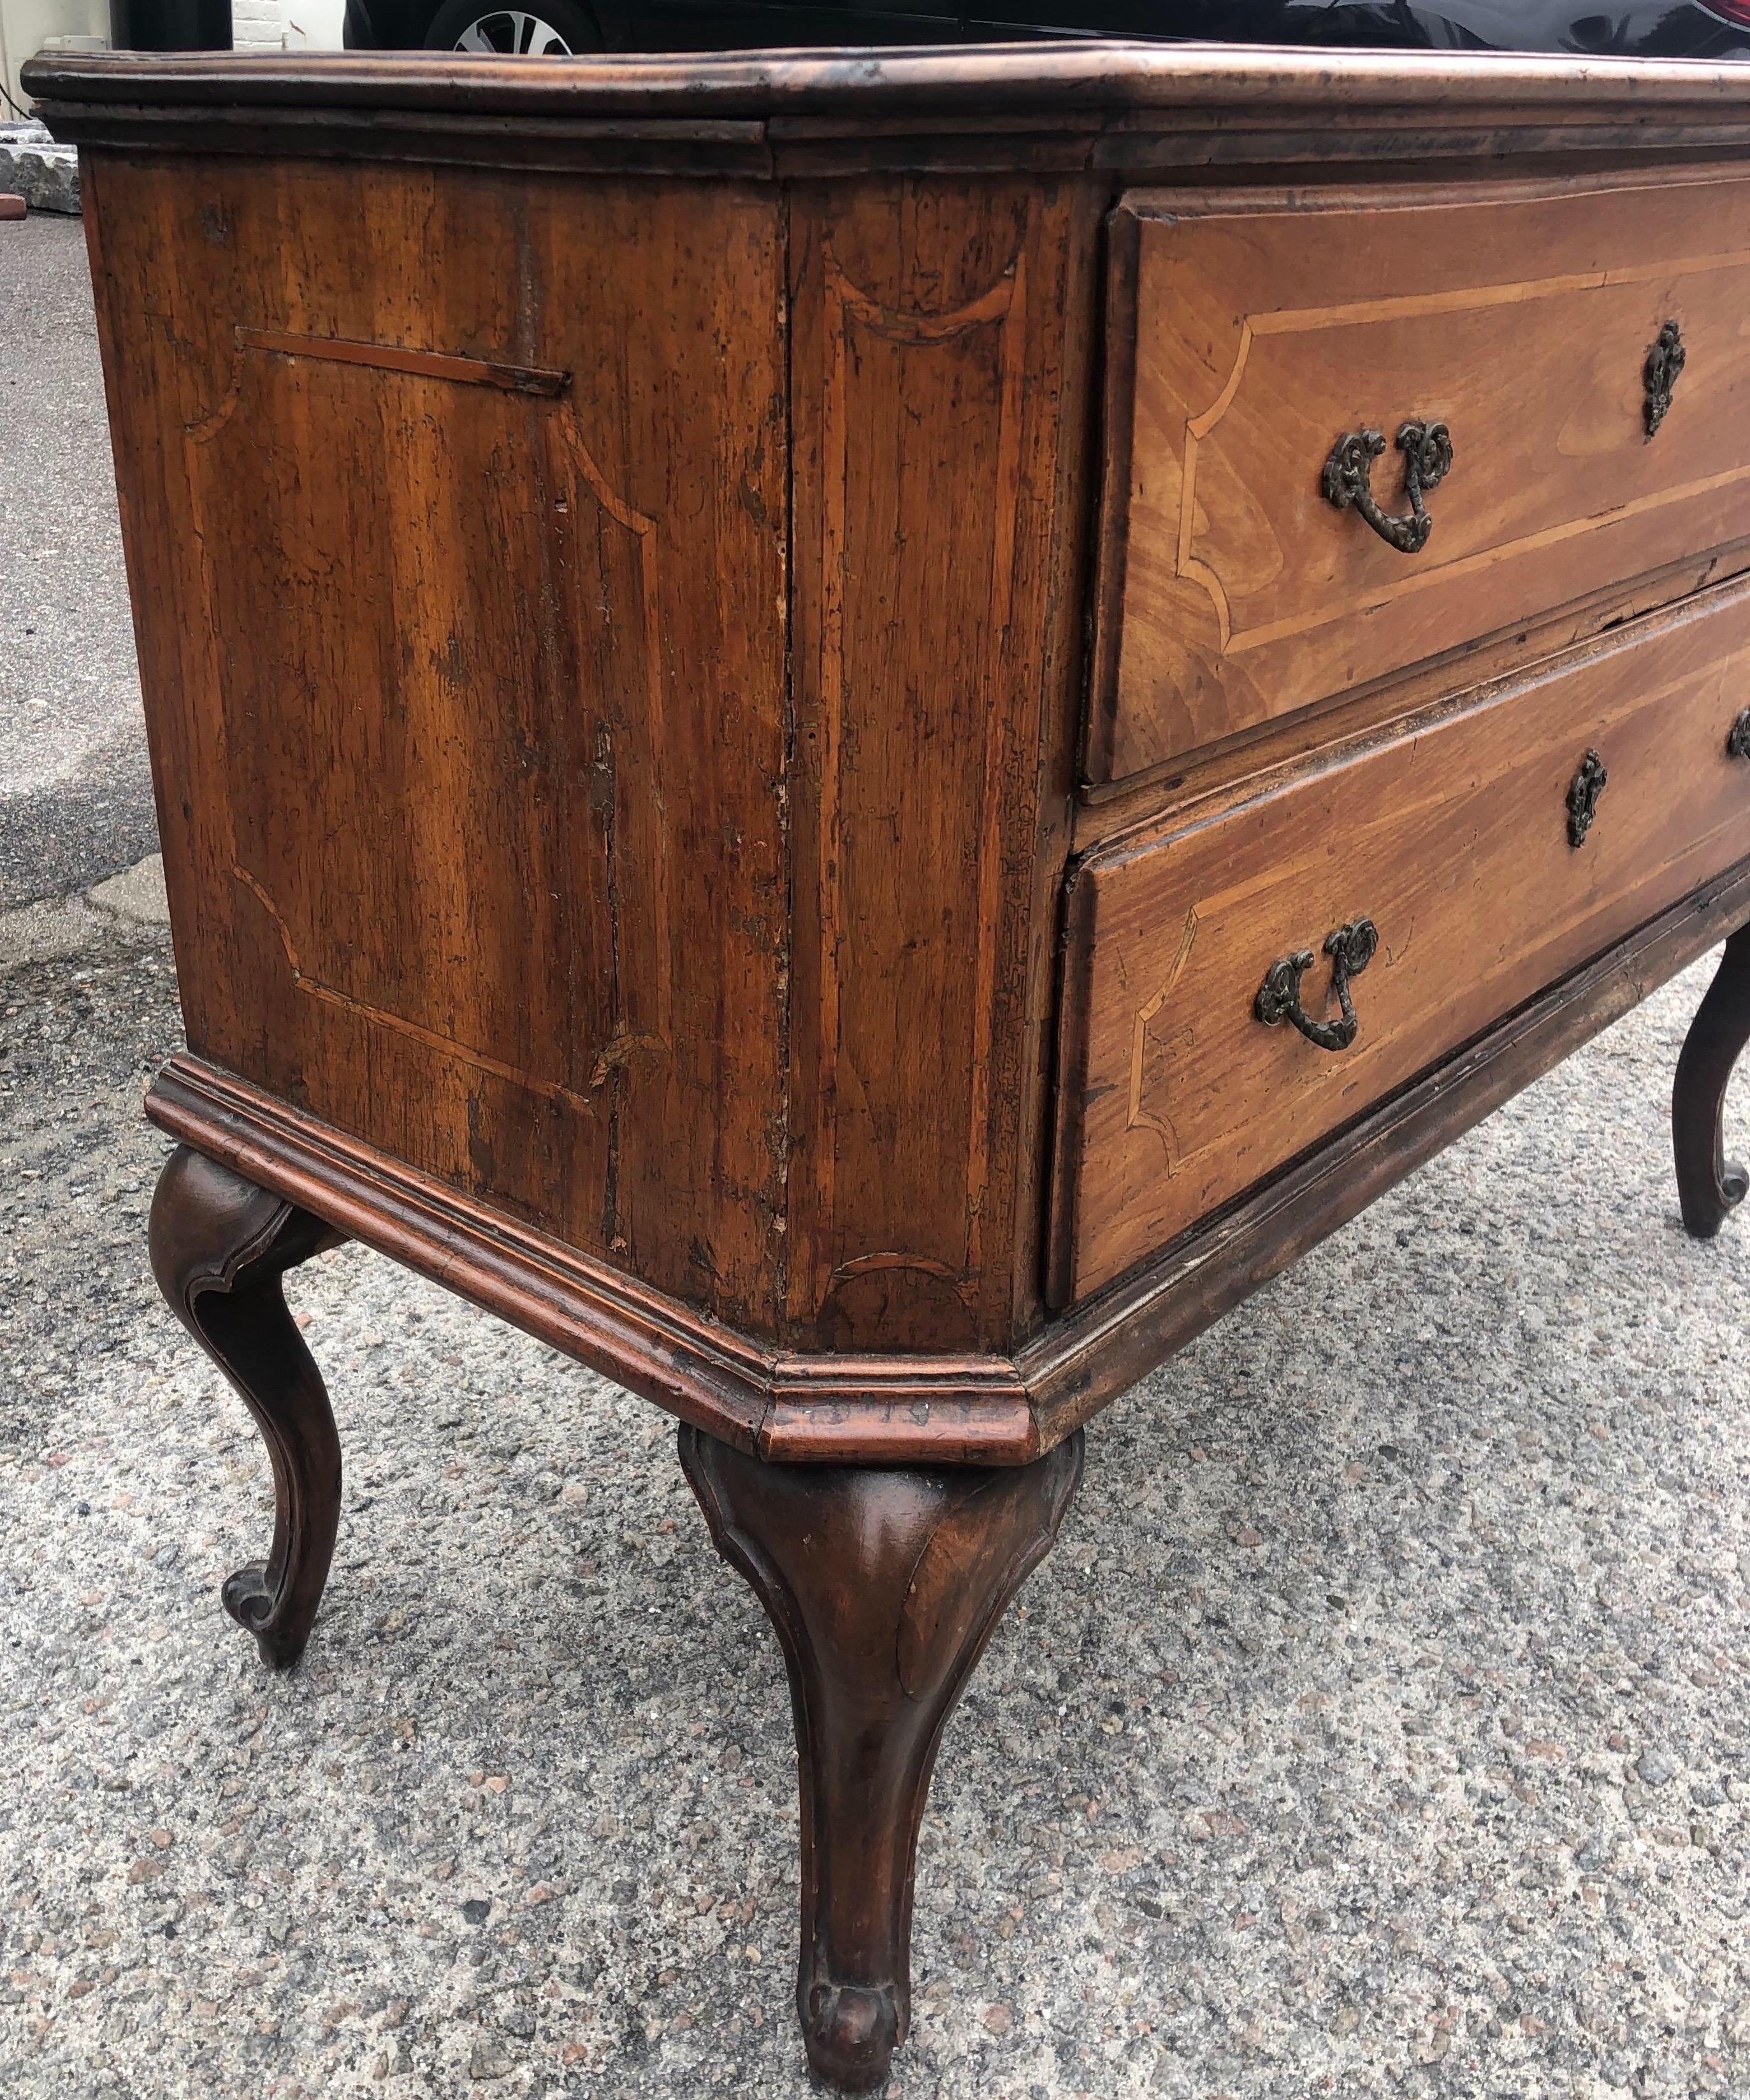 19th century Italian 2-drawer commode with inlay and cabriole legs. Beautiful patina on this walnut commode and great height and size.